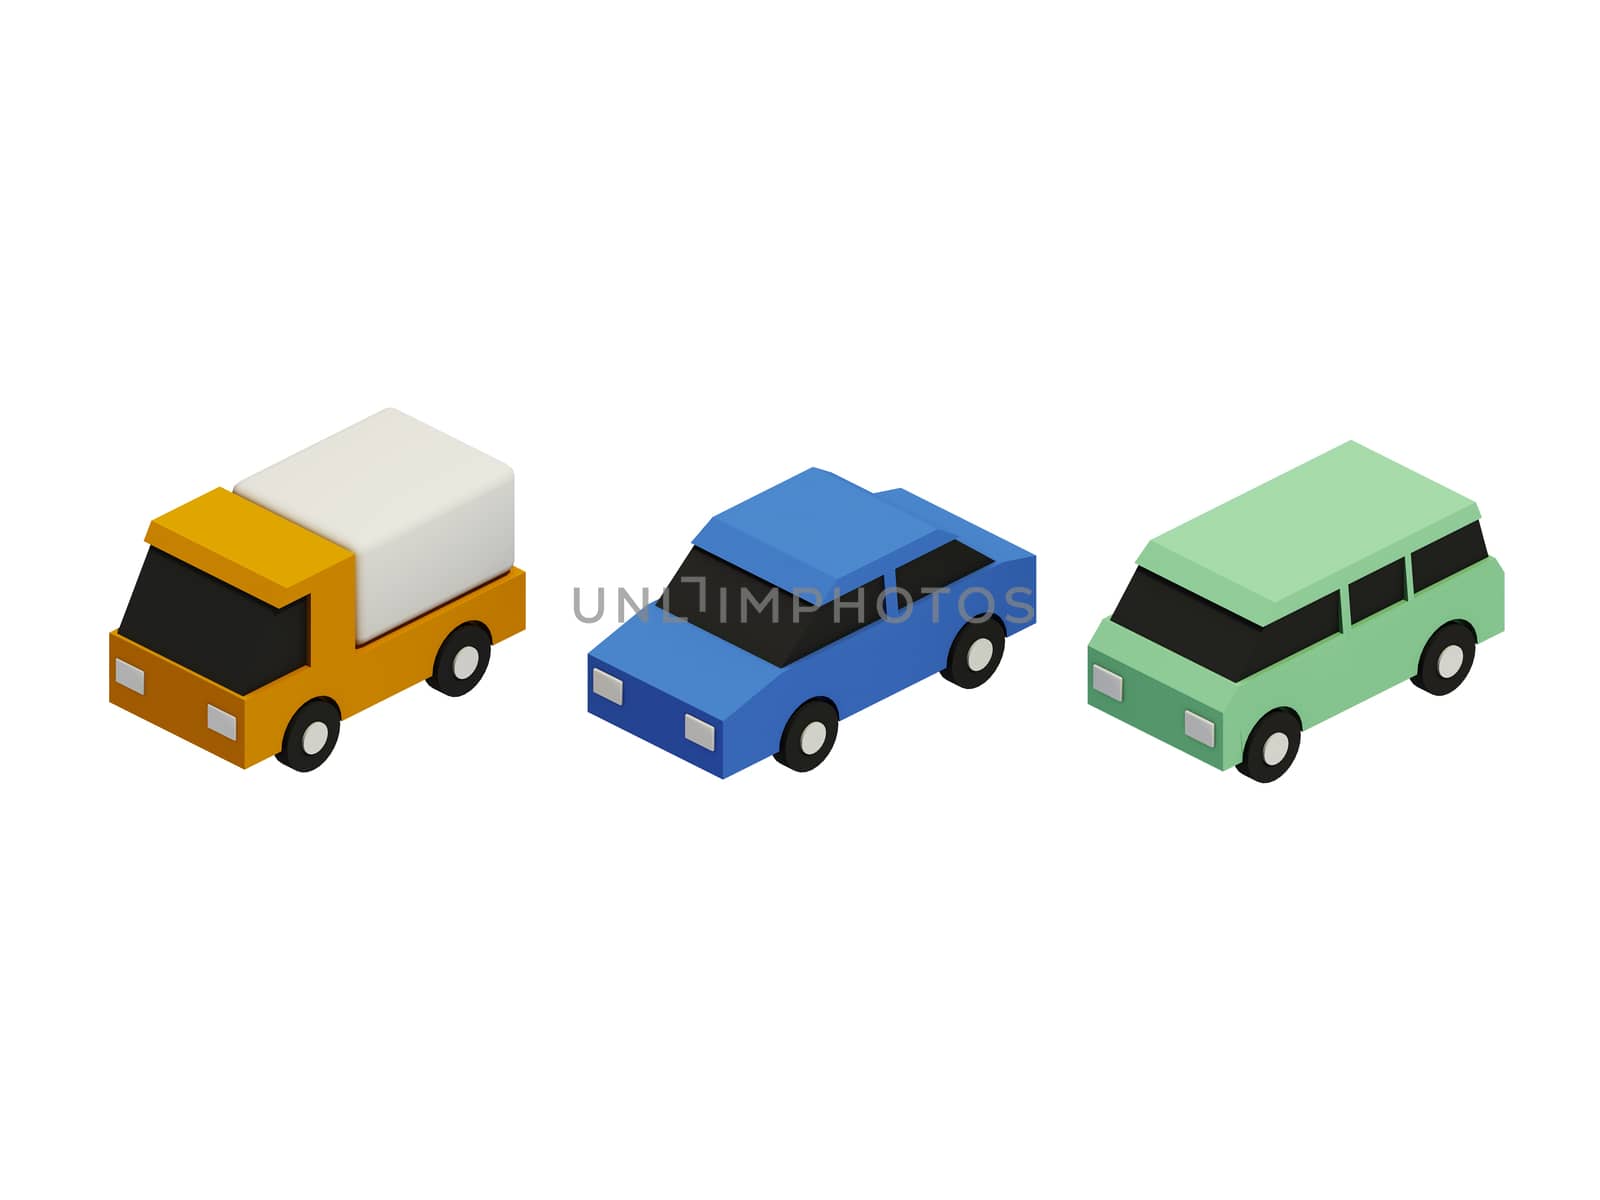 Set of the car icons by teerawit